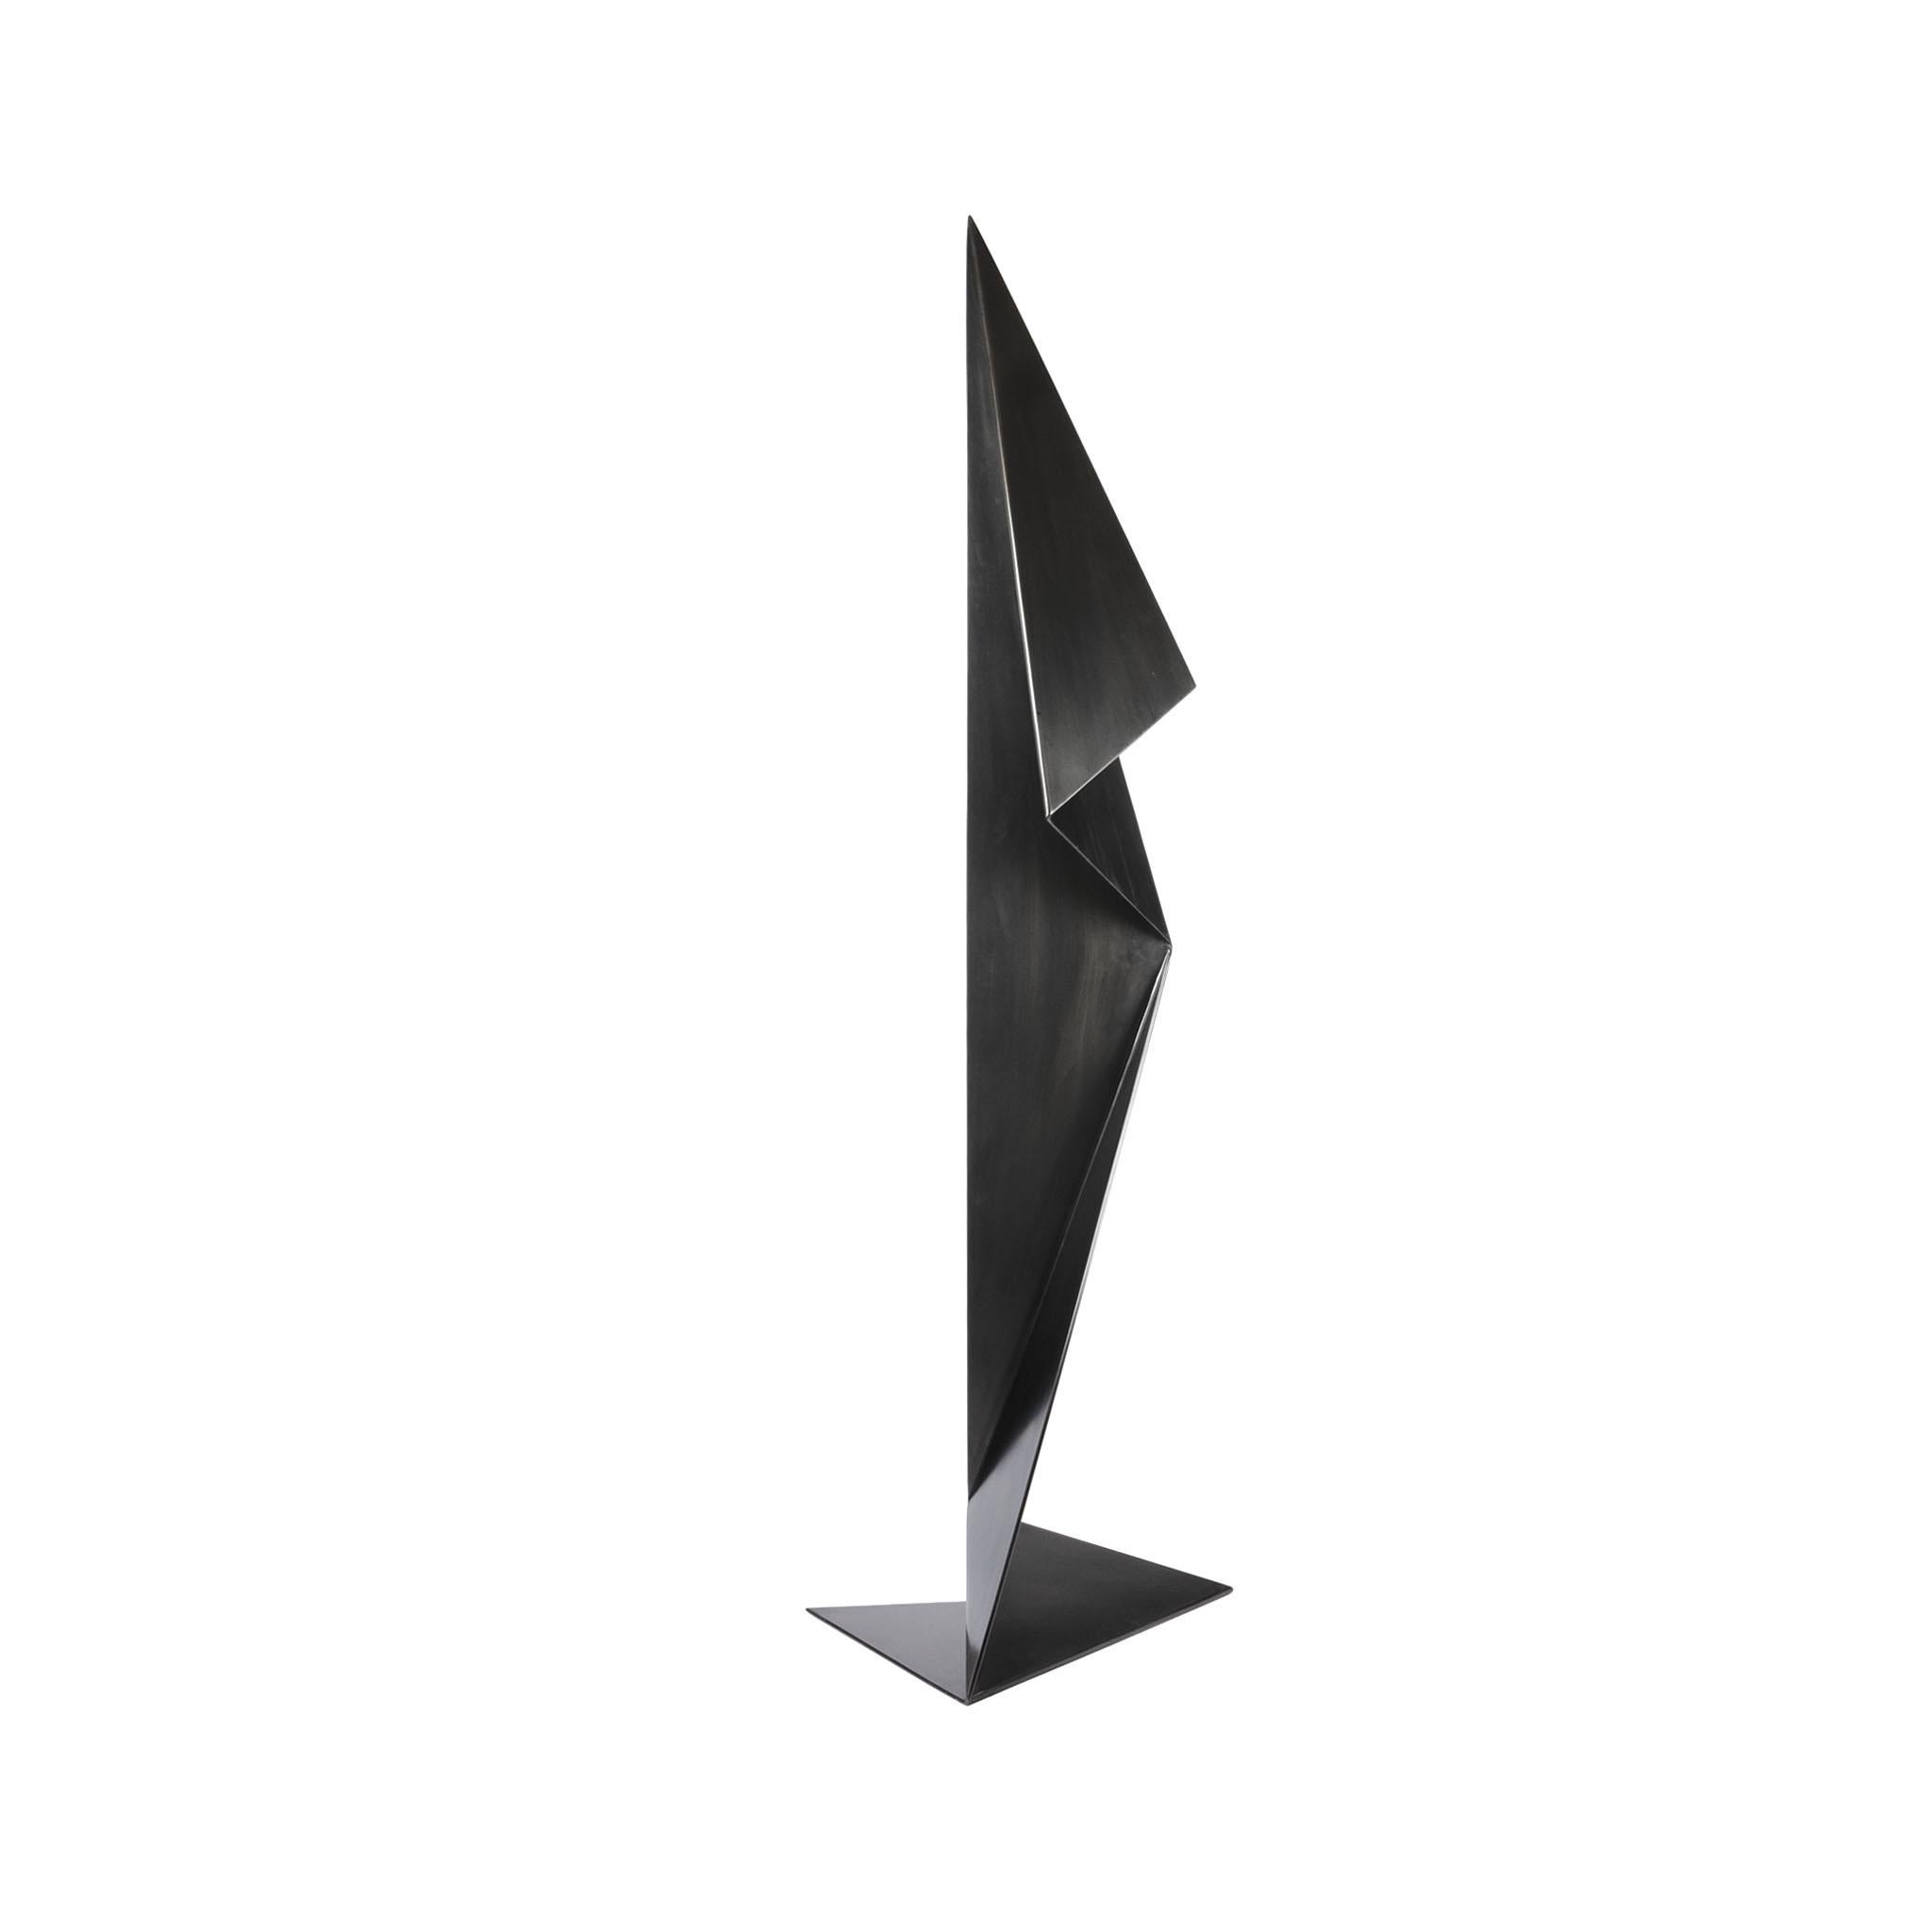 American Abstract Origami Metal Sculpture Figure Hand Blackened Finish For Sale